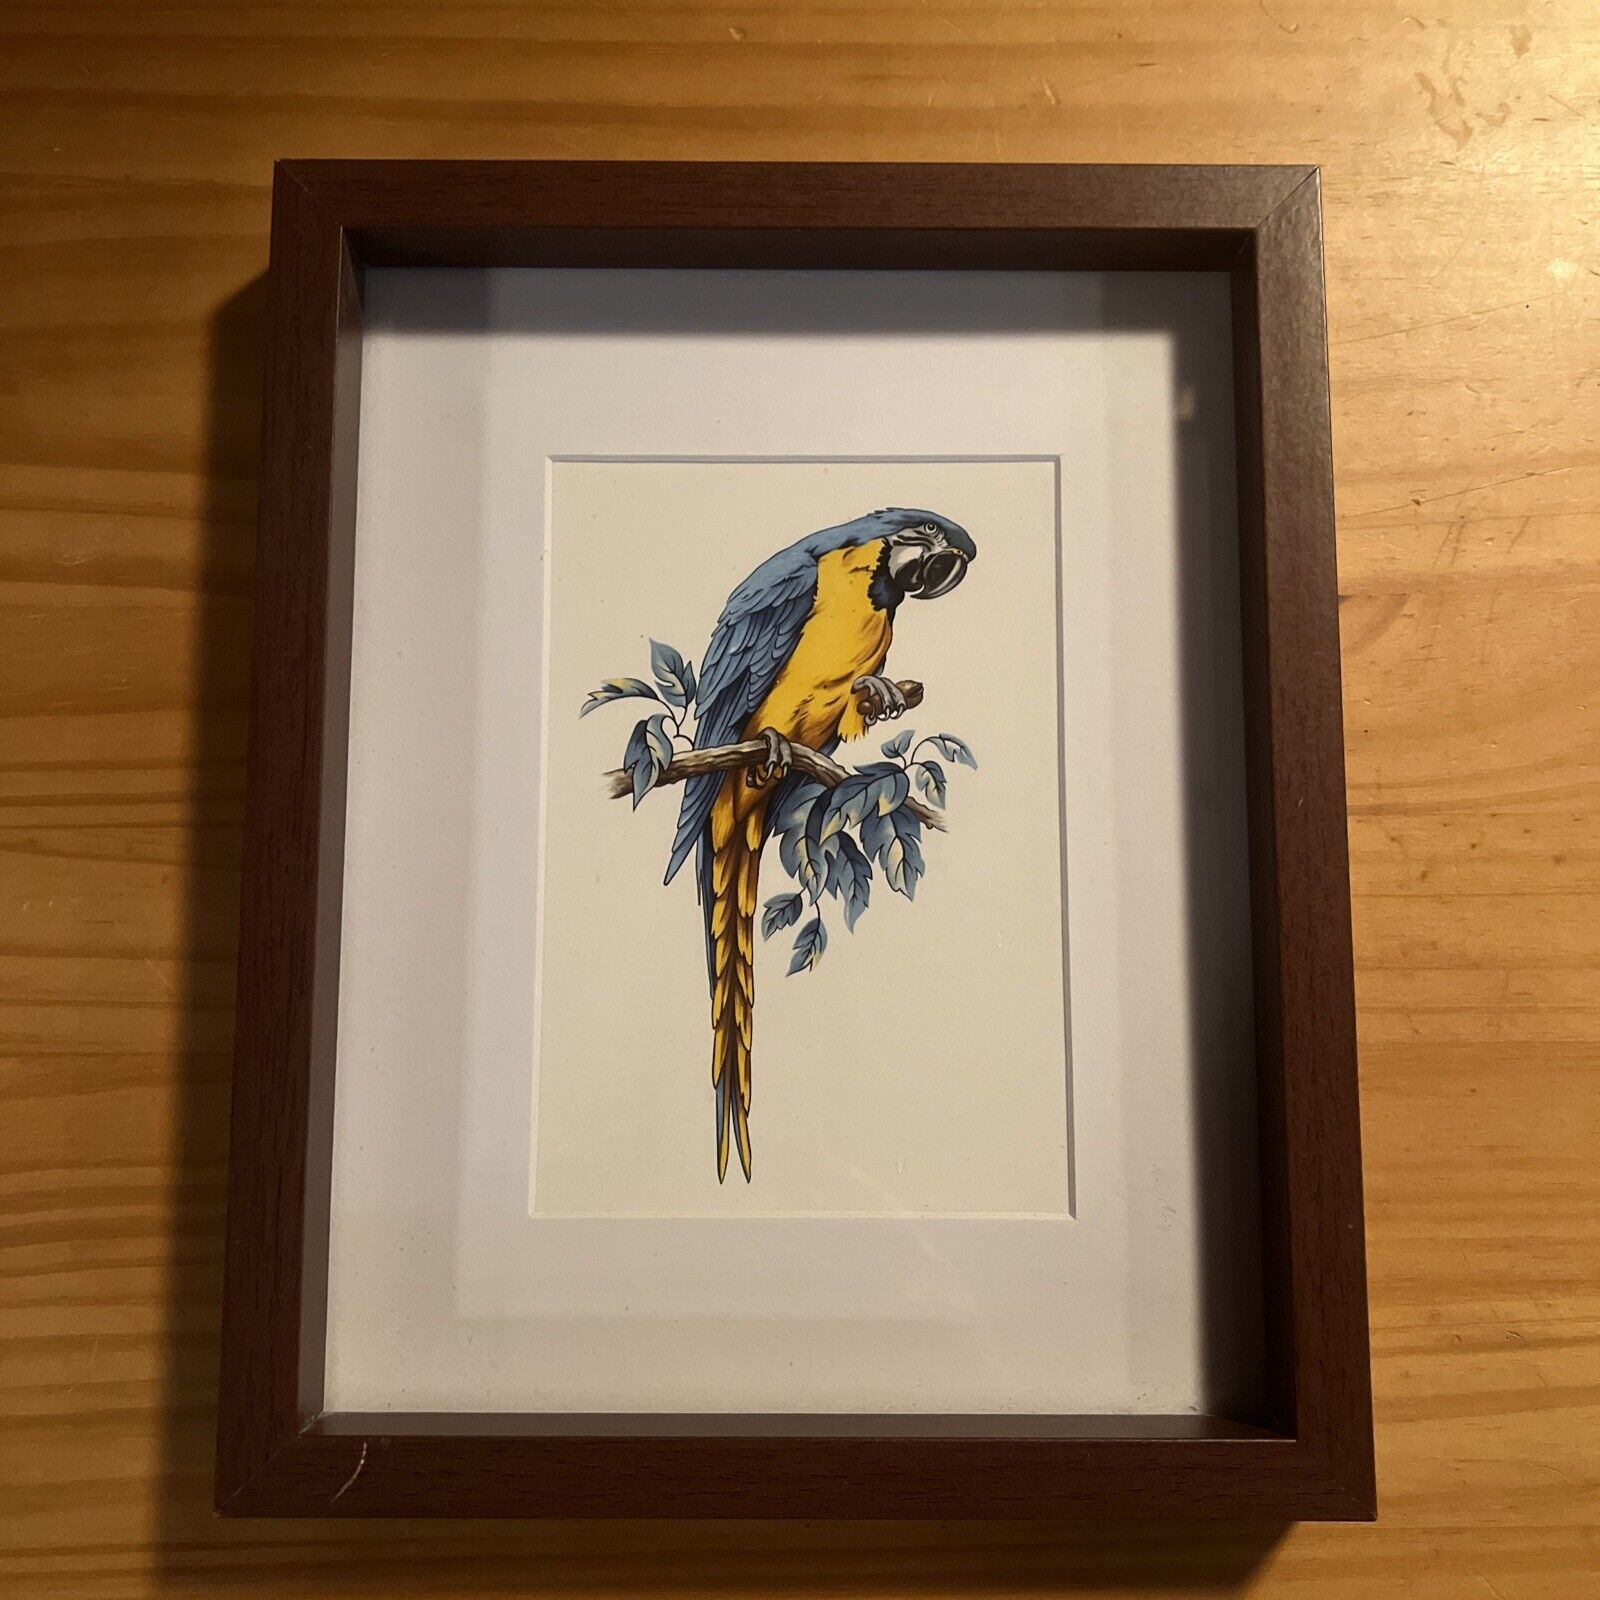 Parrot Blue And Gold Macaw Decorative Tile Art 8 x 6 Matted To 8 x 10 and Framed